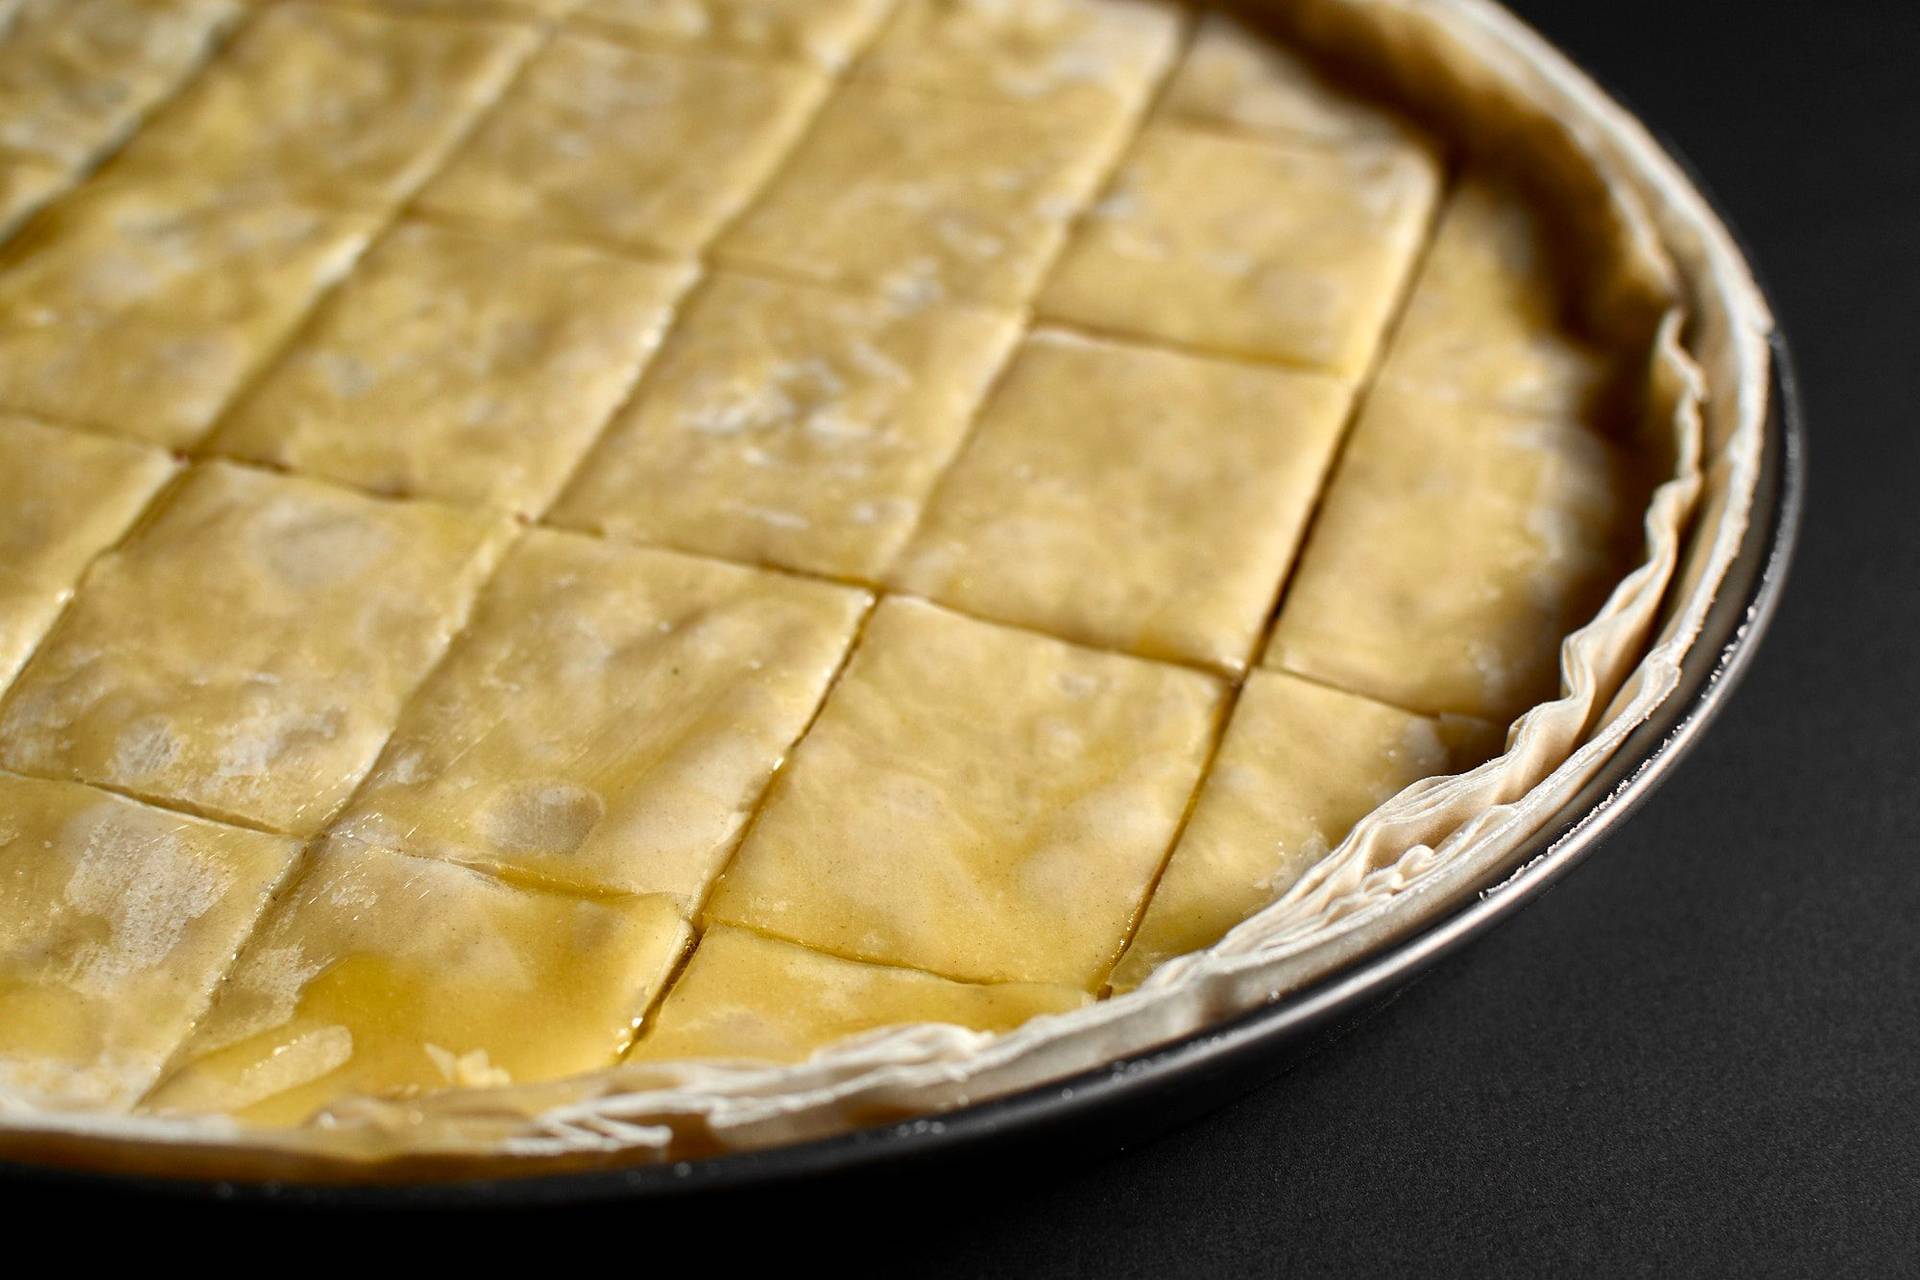 making baklava with hazelnuts and walnuts in a baking pan with black background